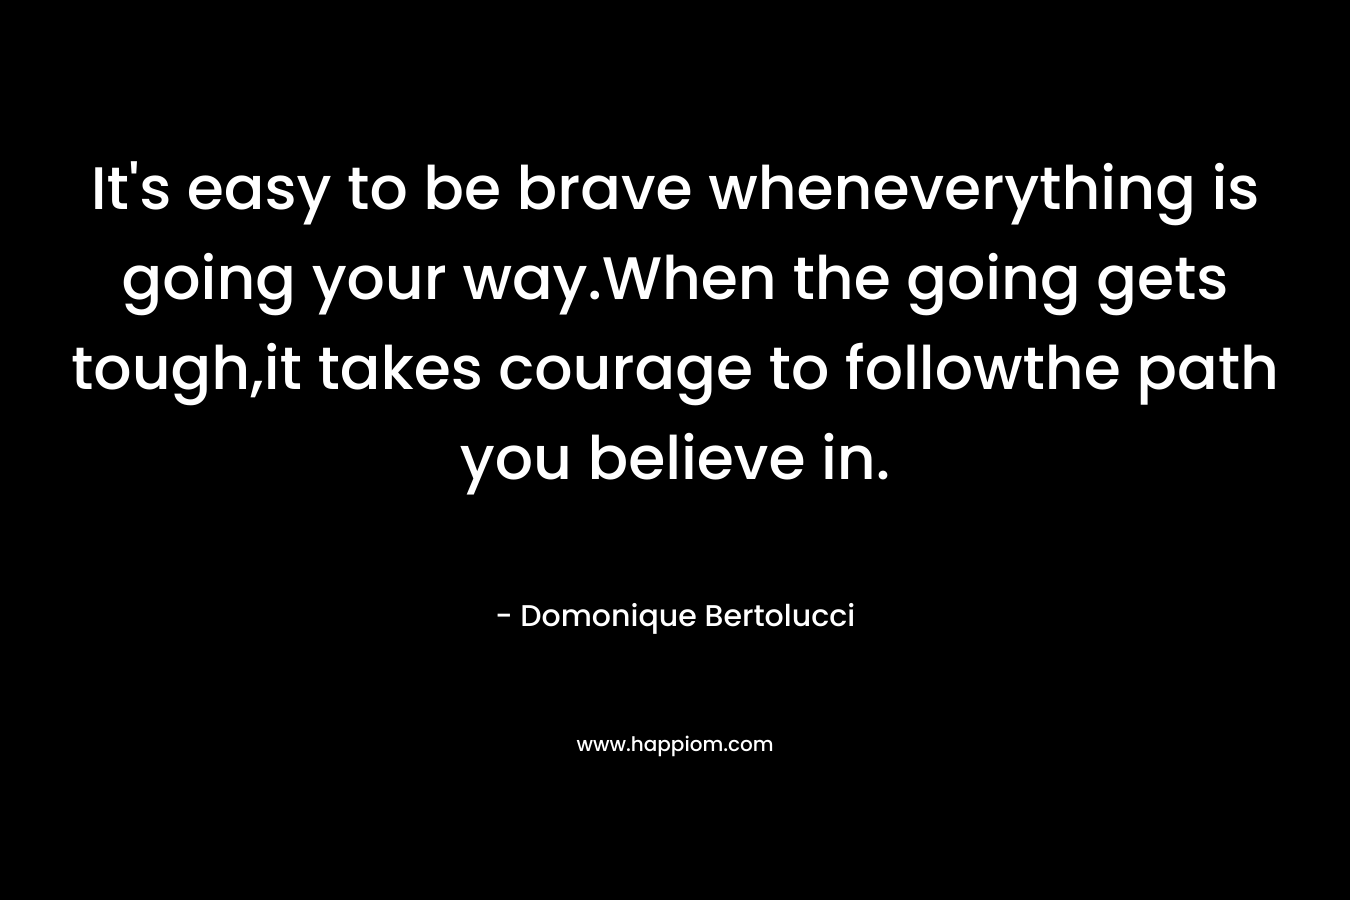 It's easy to be brave wheneverything is going your way.When the going gets tough,it takes courage to followthe path you believe in.